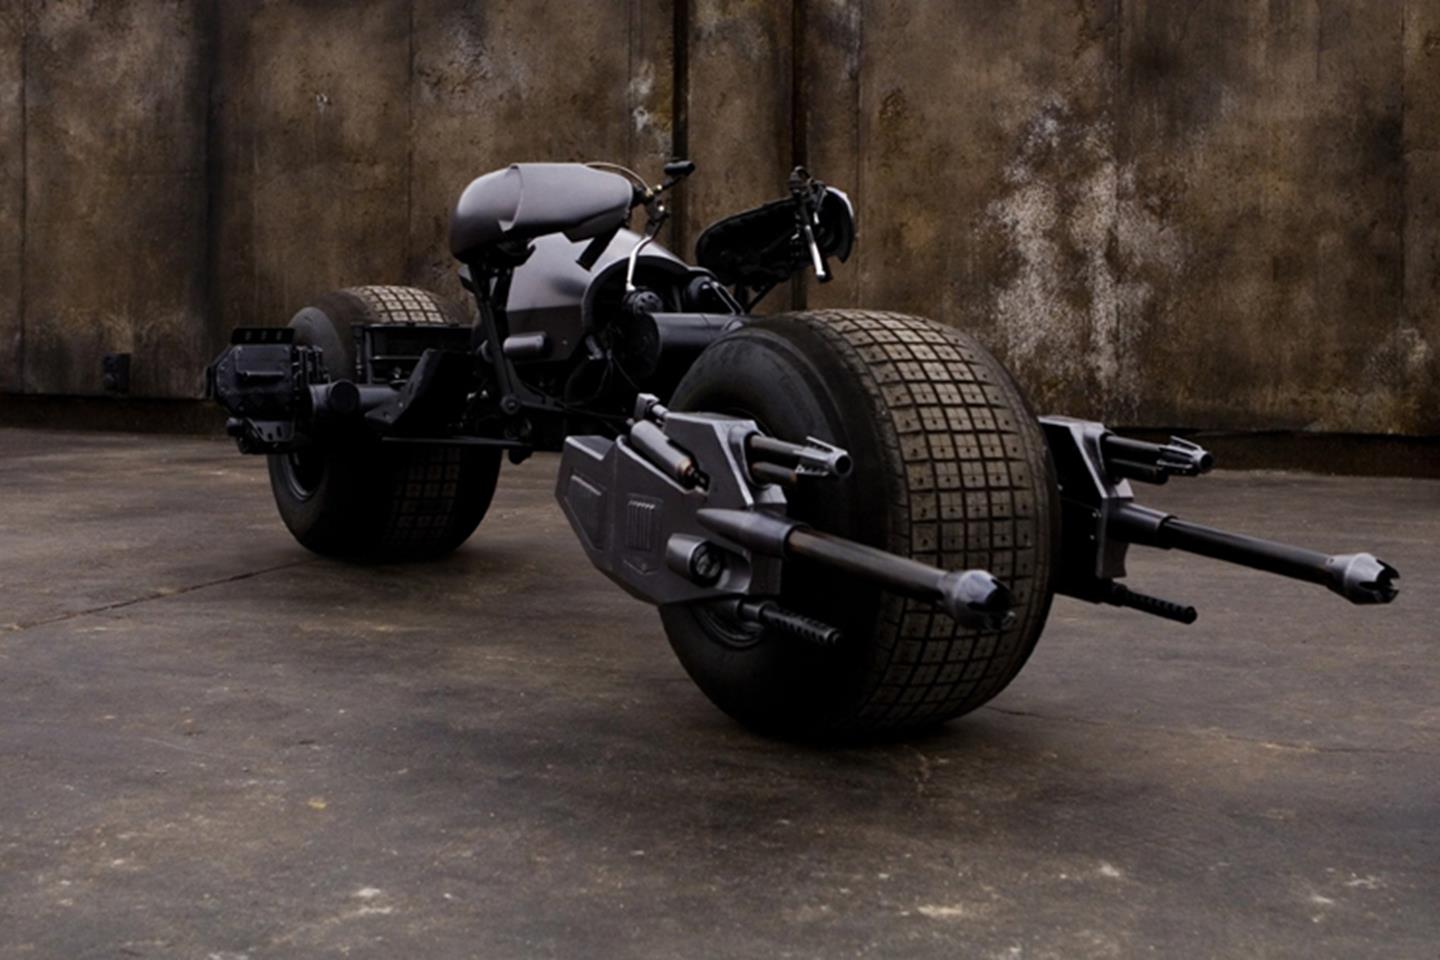 Batman's new motorcycle for next film The Dark Knight MCN